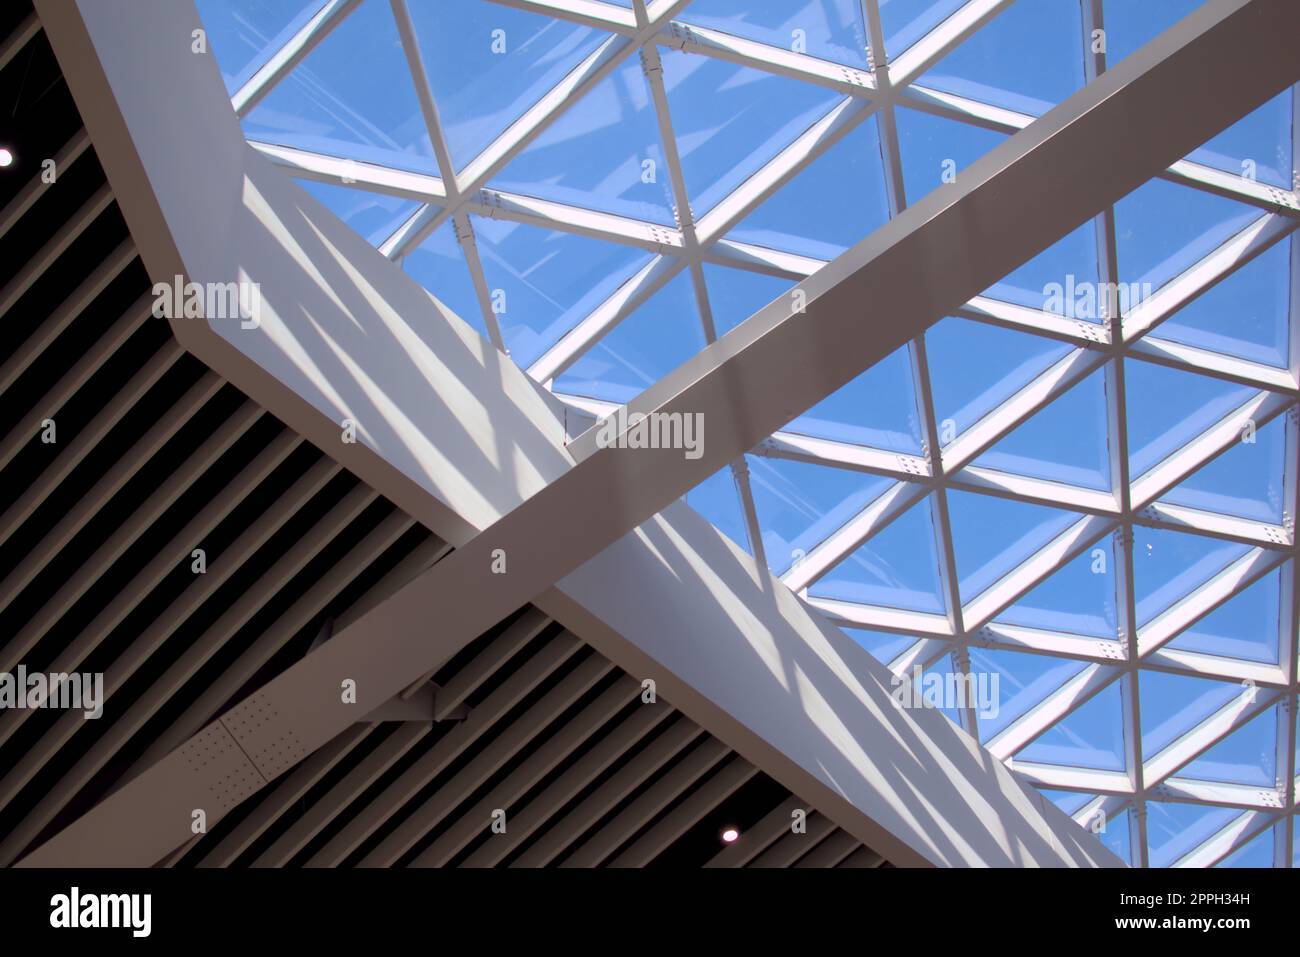 Large, modern design glass skylight at an airport. The beams form triangular patterns. Stock Photo